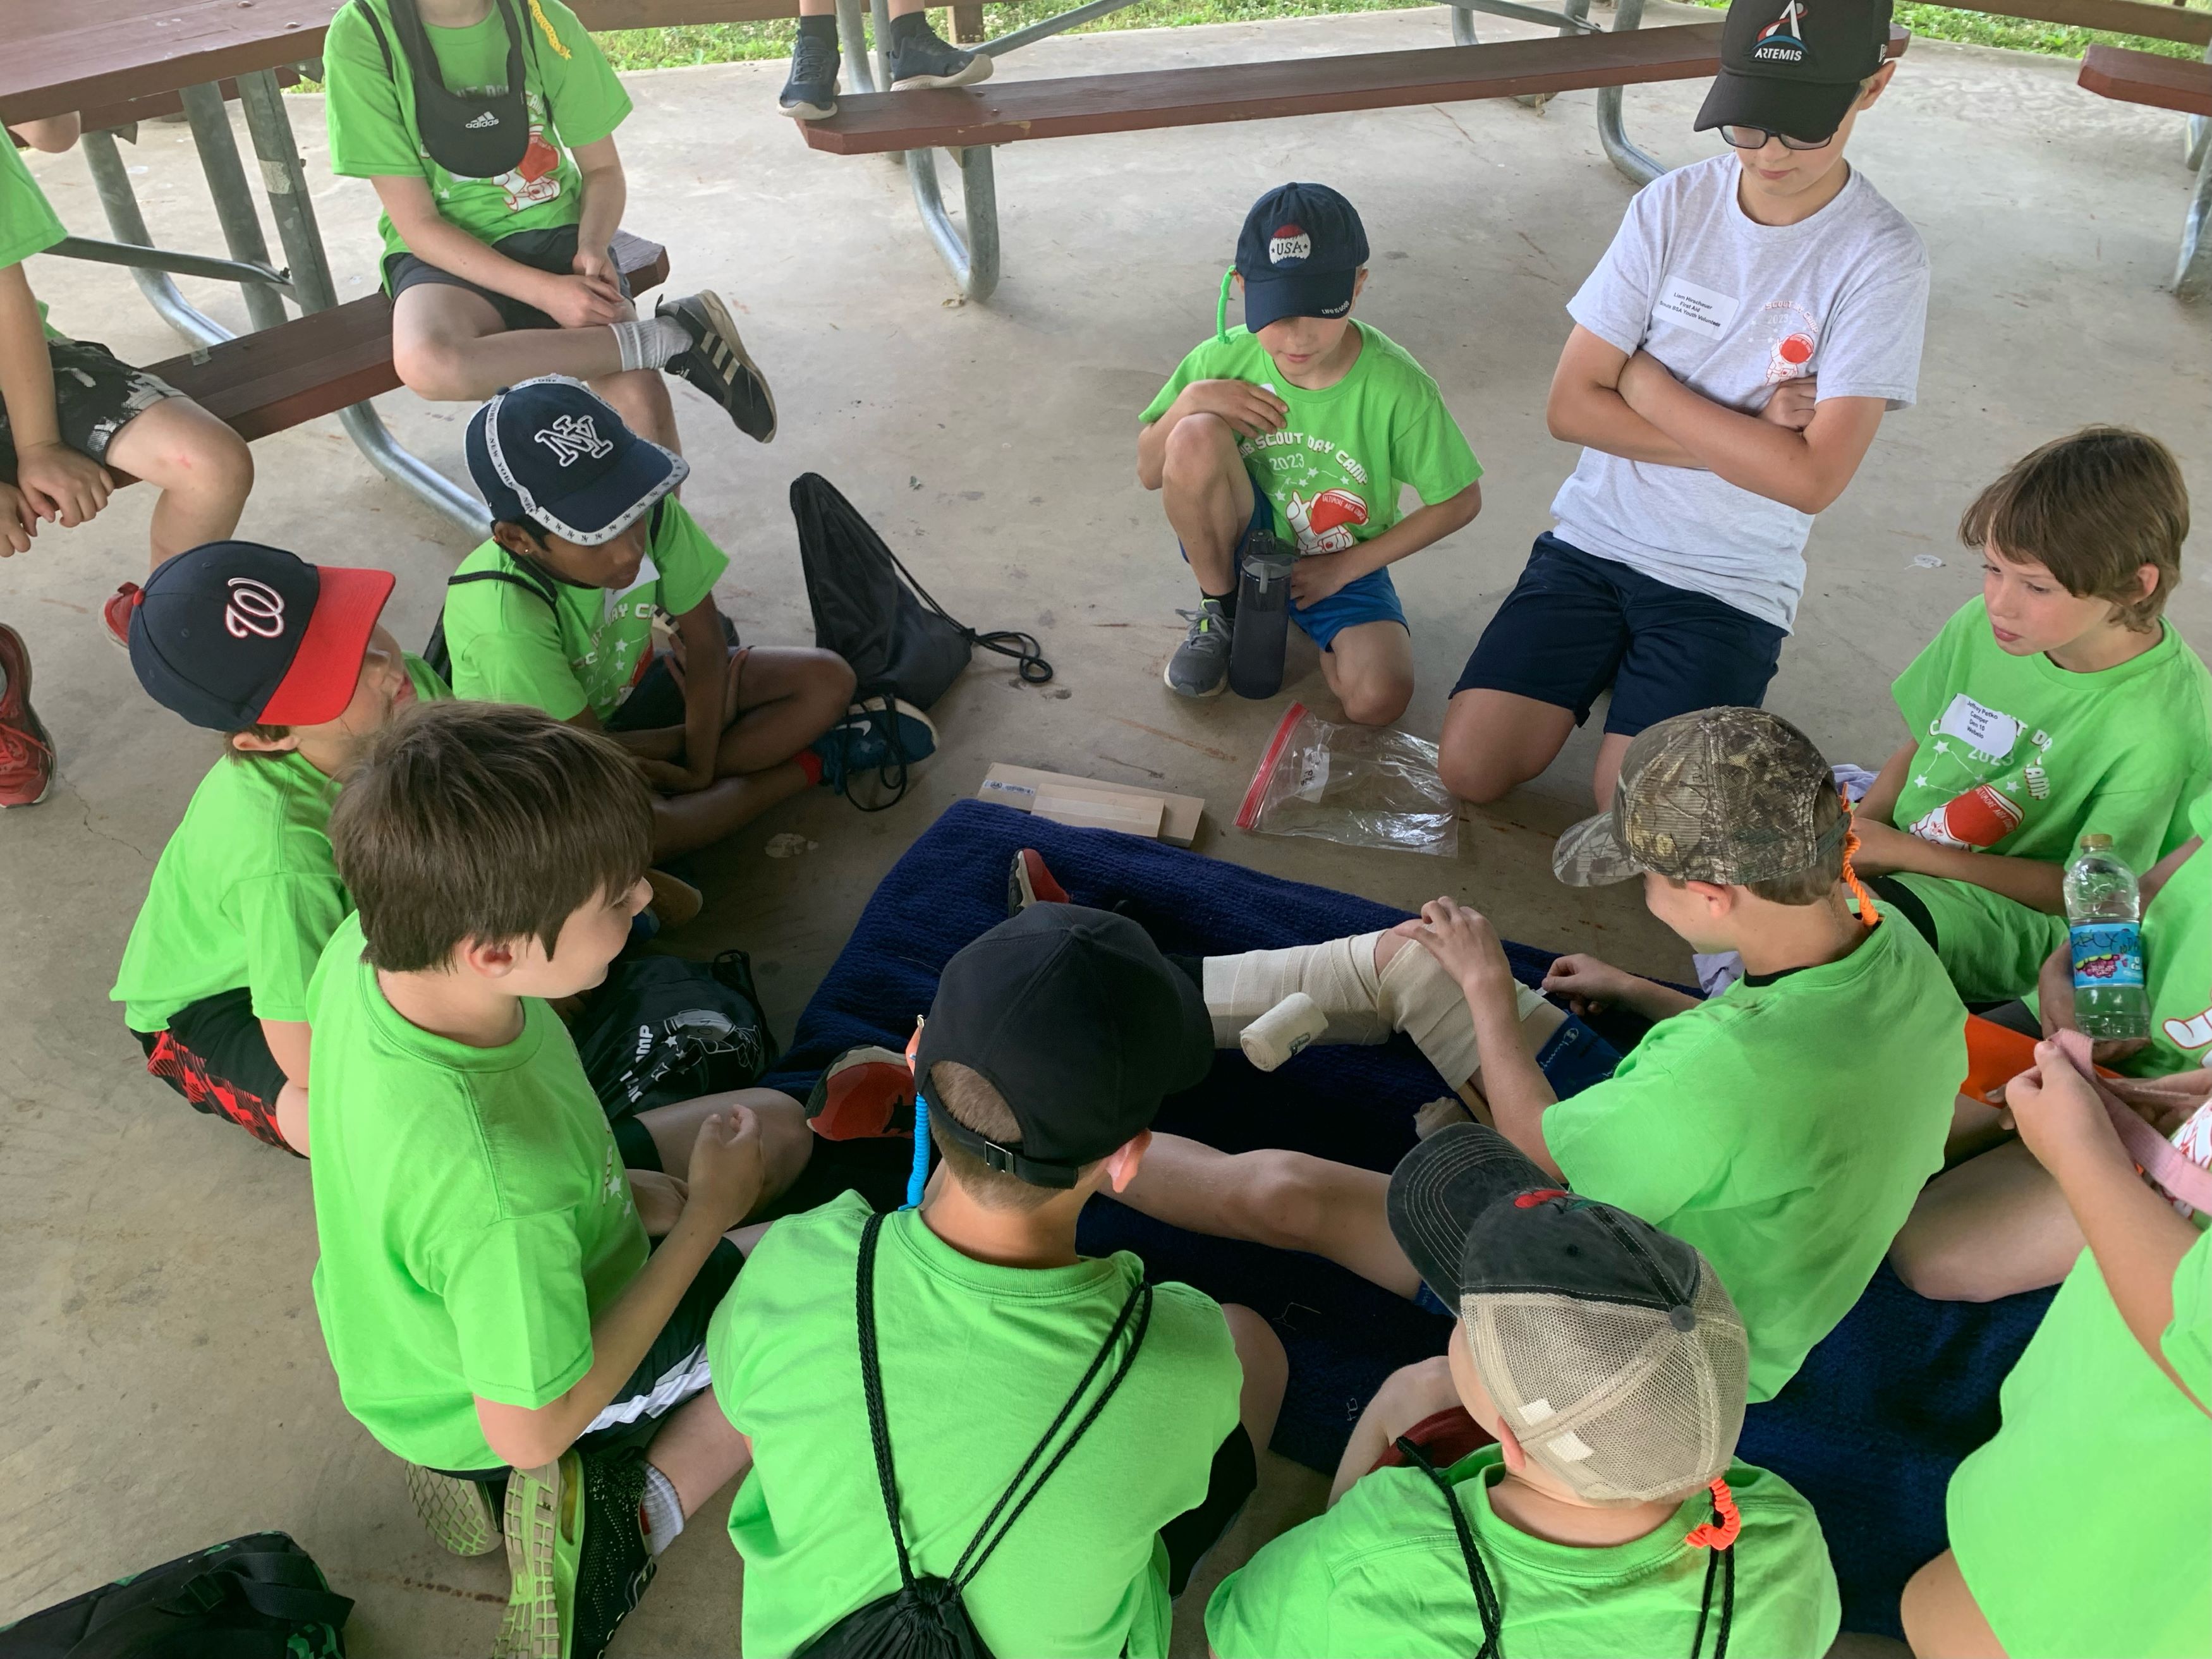 Scouts in green shirts gathered around a mat on which a scout is bandaging his leg